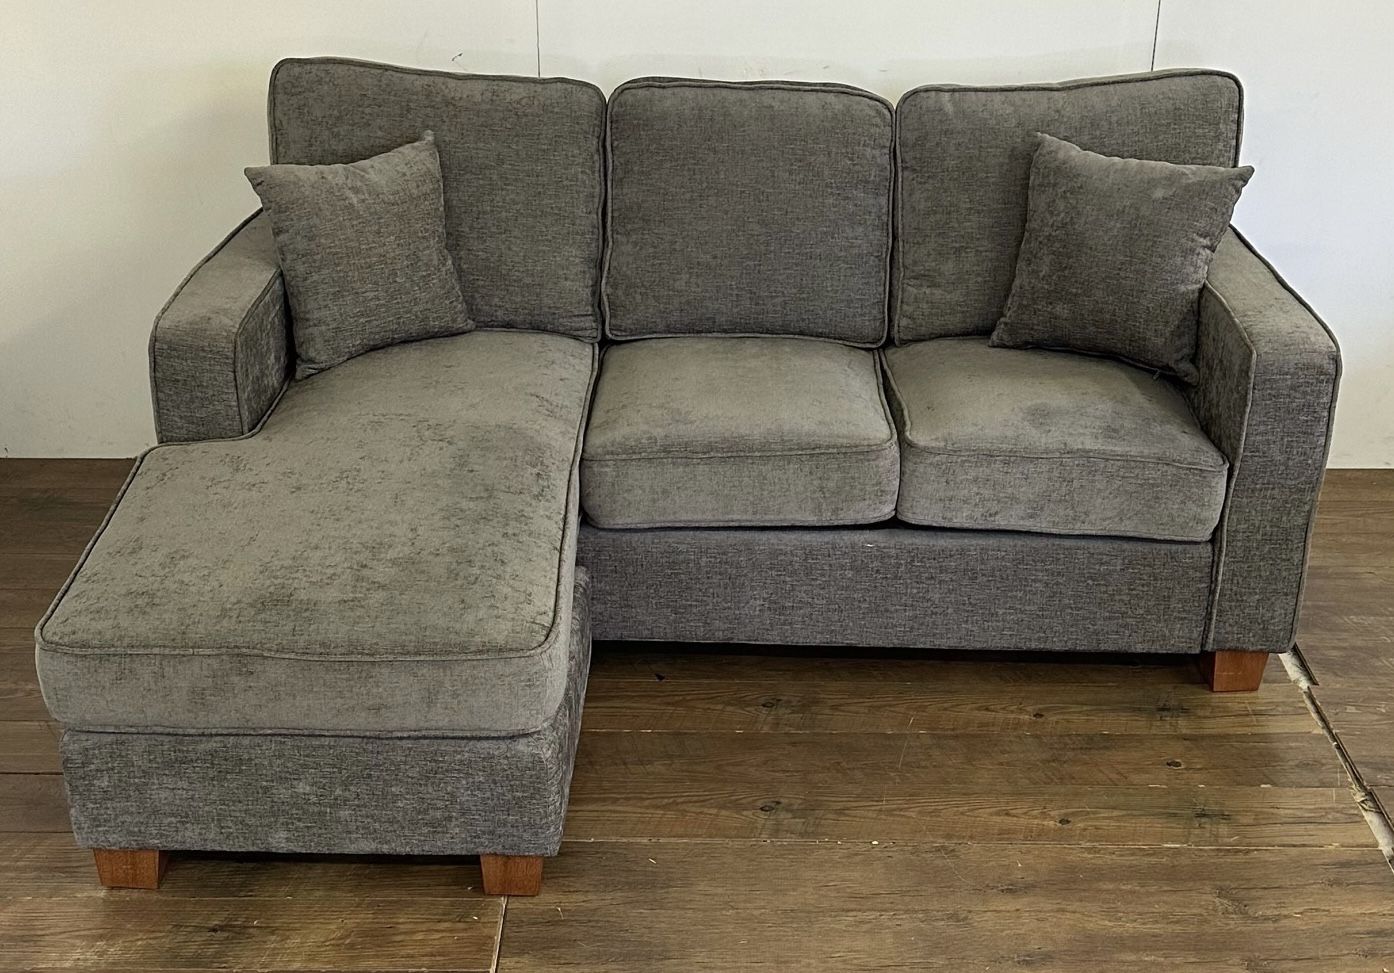 Reversible Gray Sectional Couch 